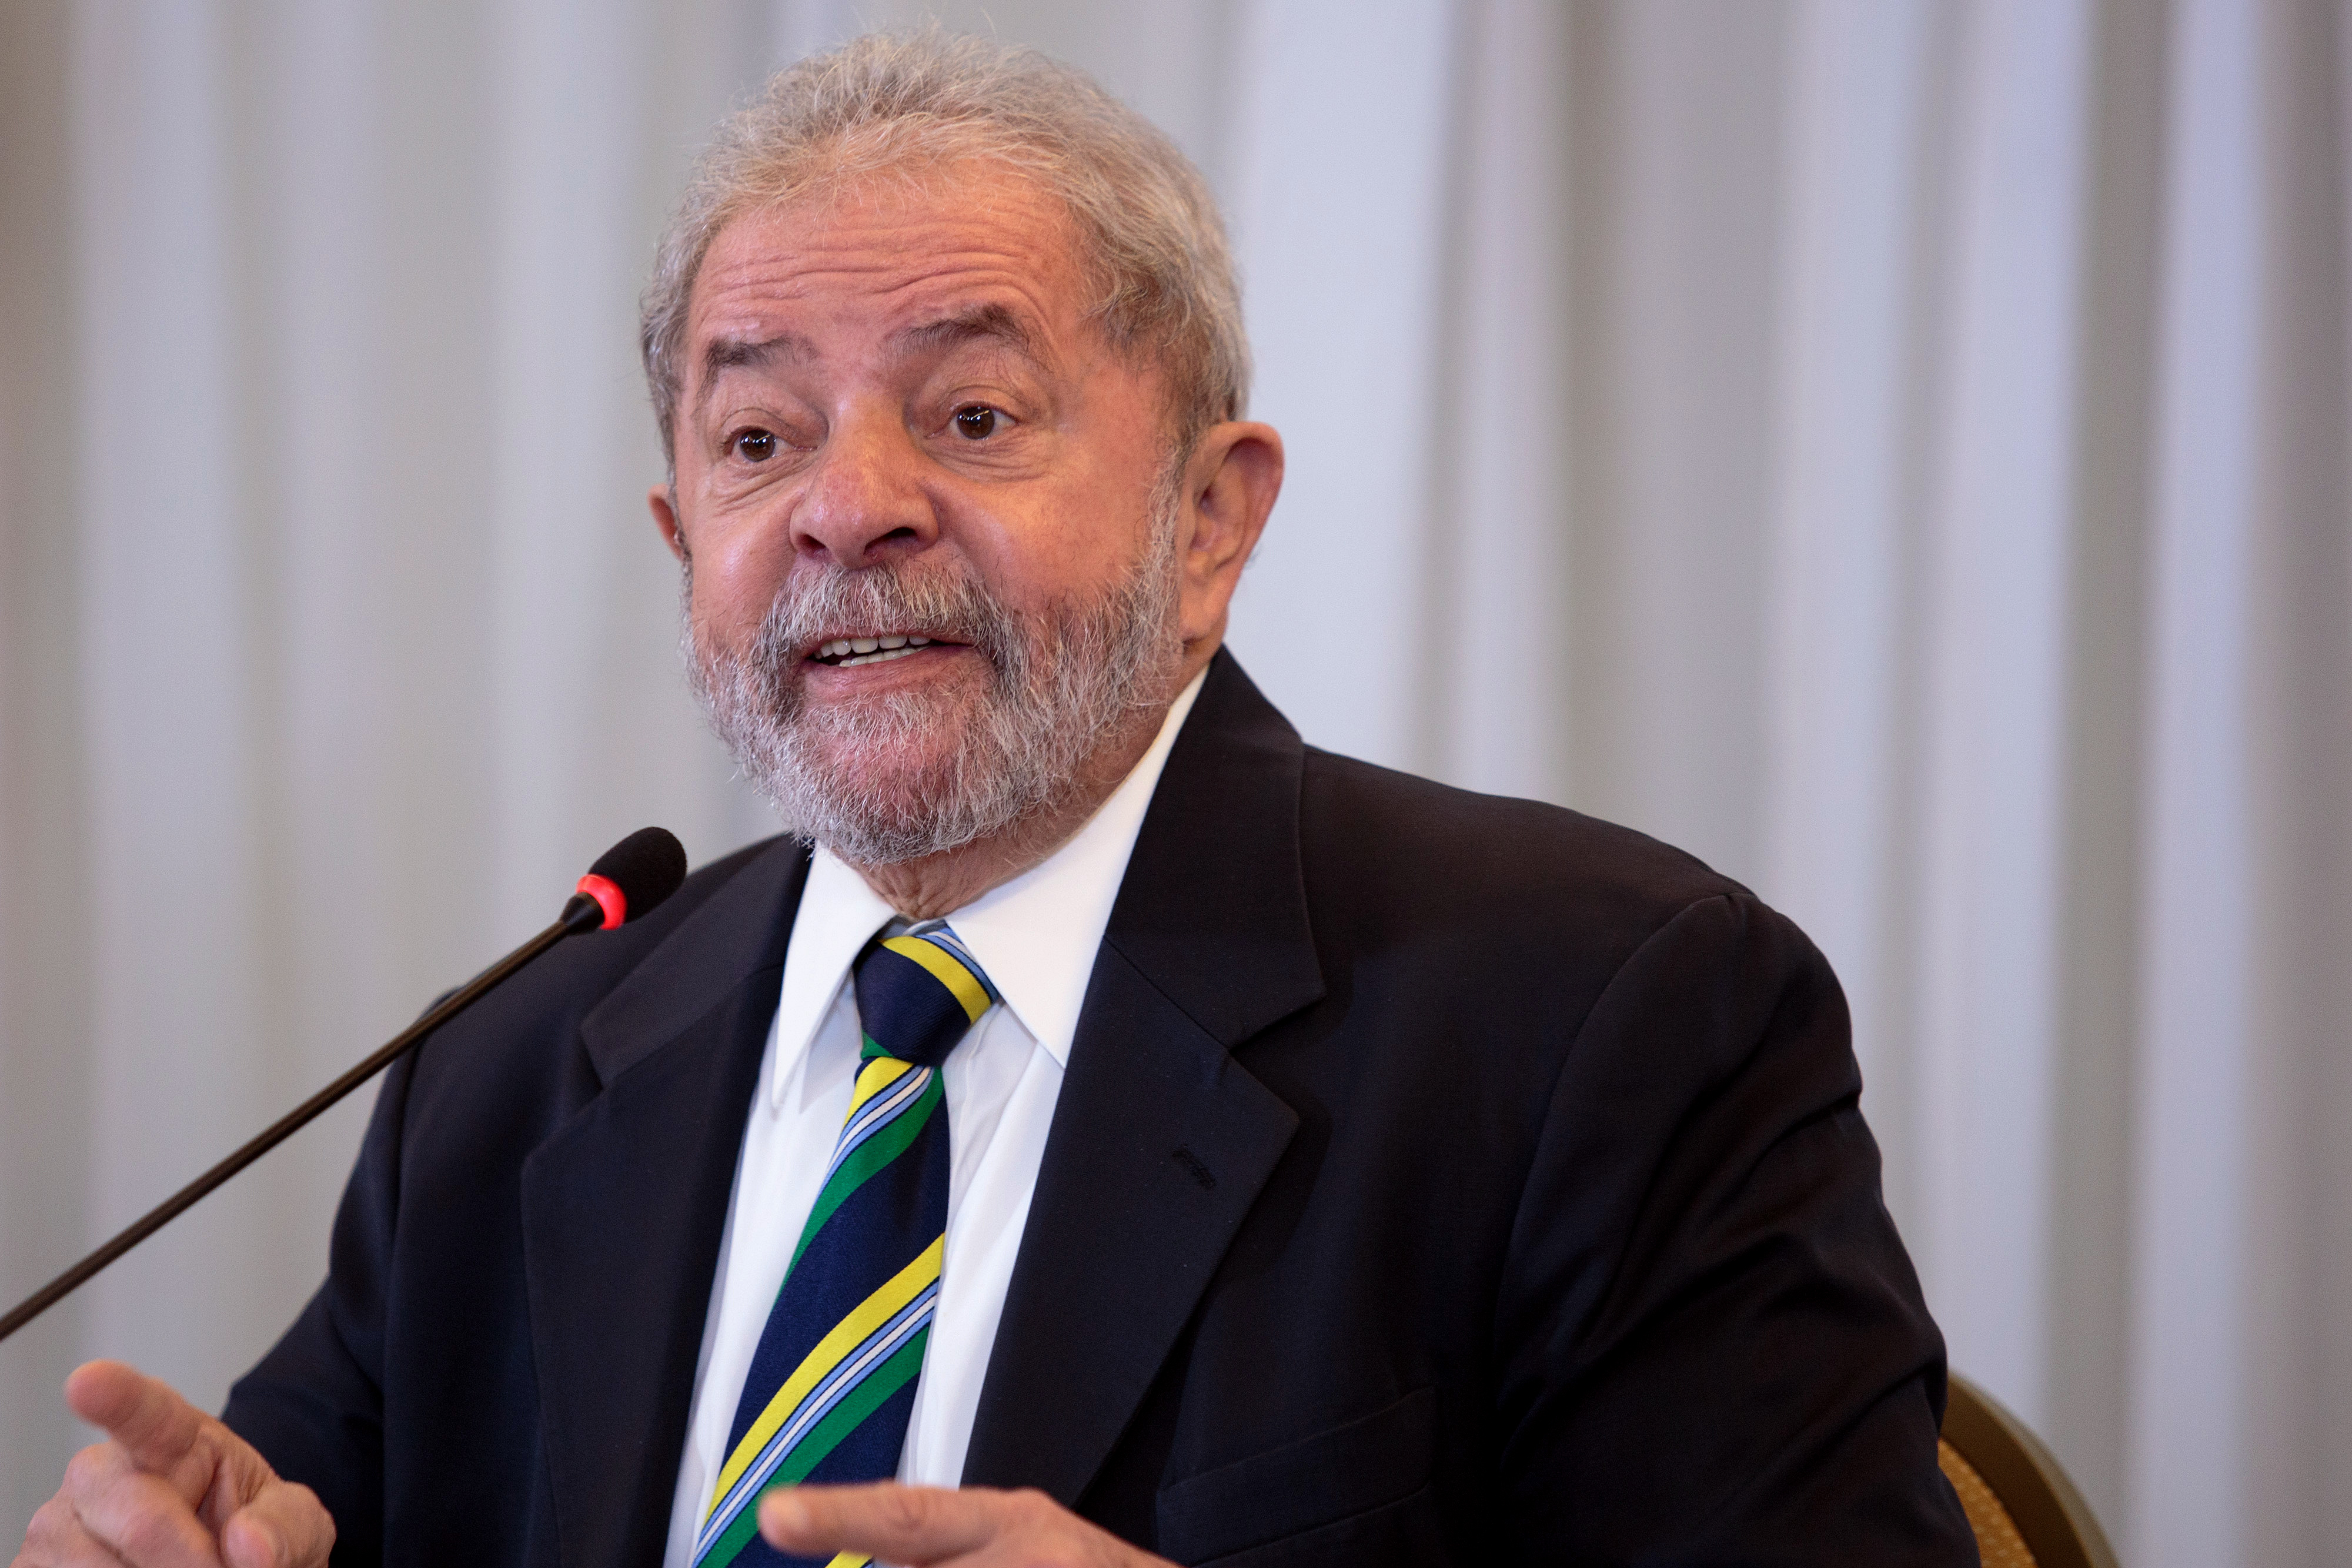 Brazil's Inacio Lula to stand trial for obstruction of justice - court